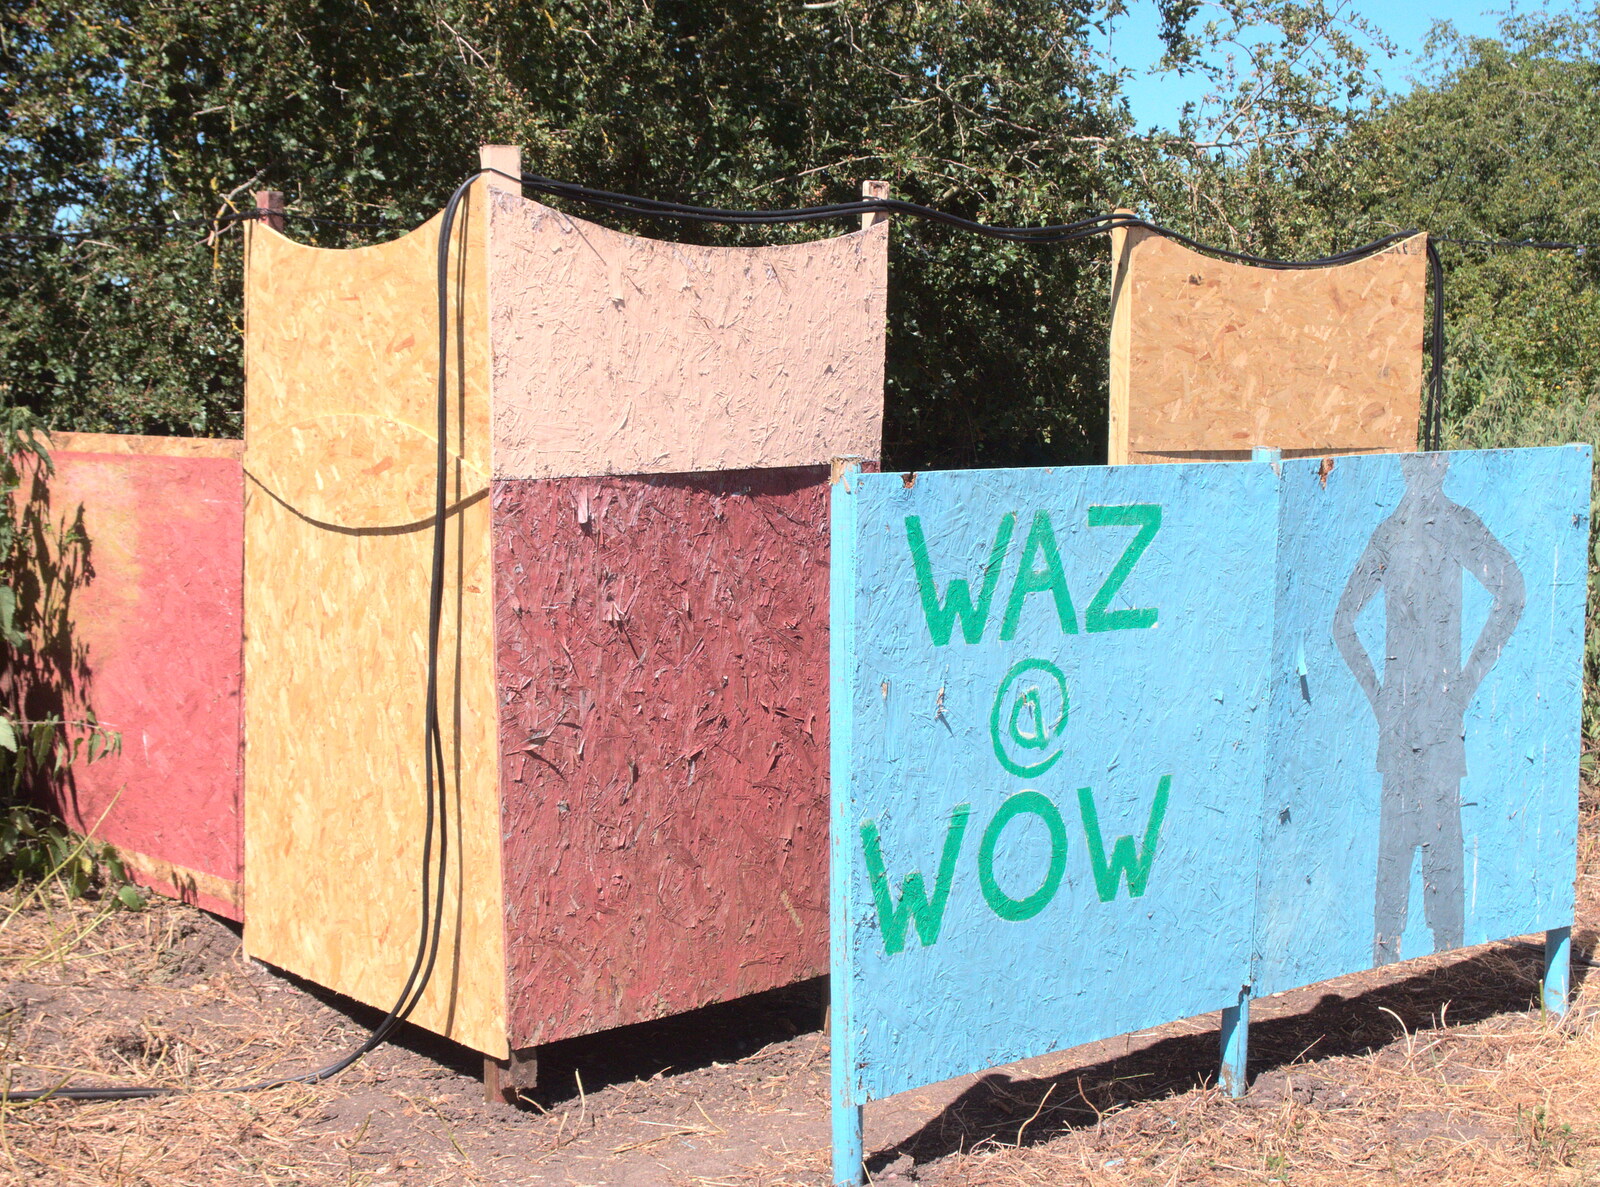 Some of the outdoor urinals - waz @ WoW from WoW Festival, Burston, Norfolk - 29th June - 1st July 2018